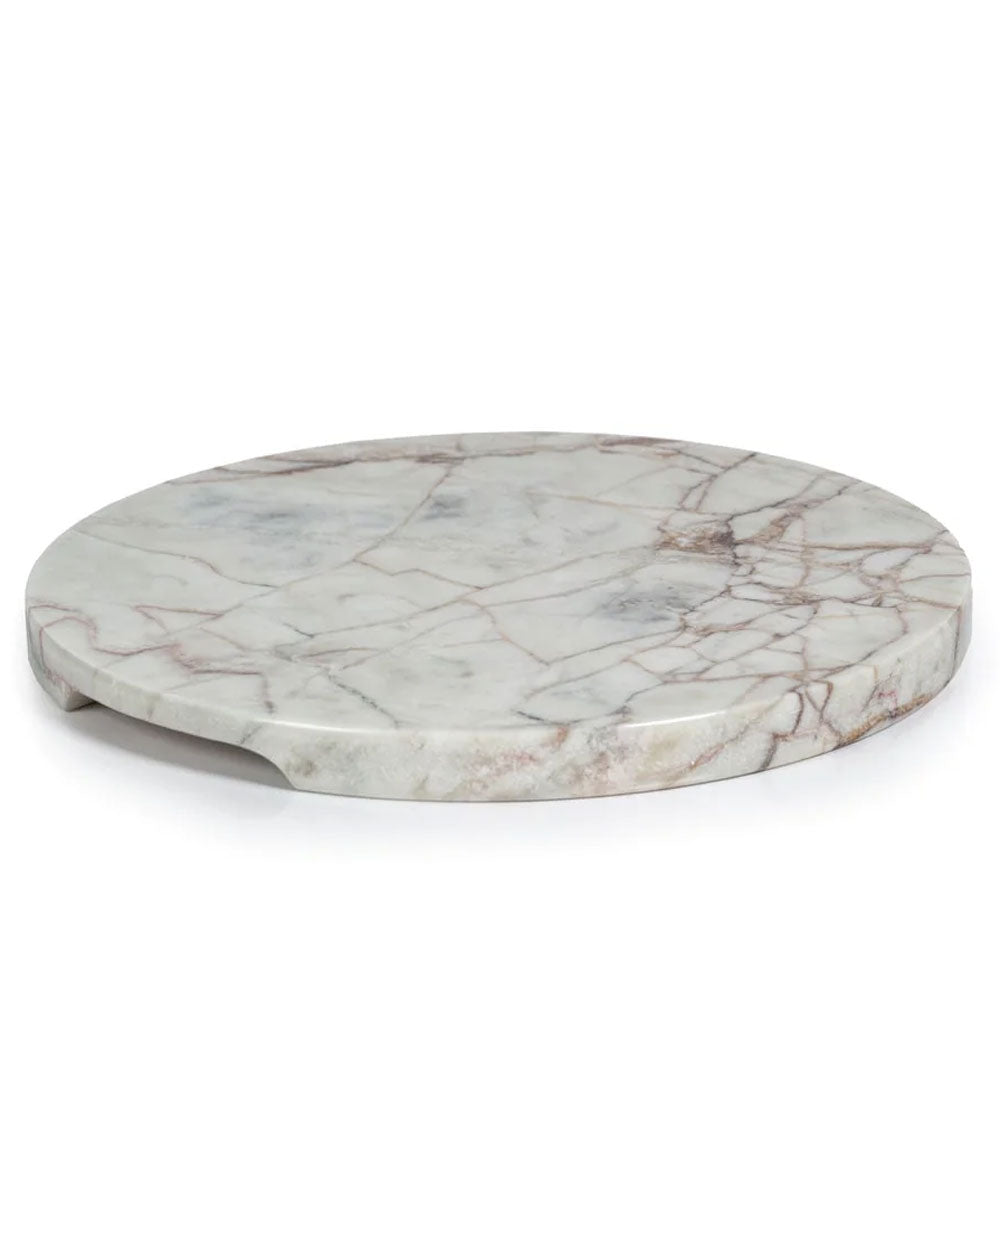 Rosso Verona Polished Marble Cheese Board